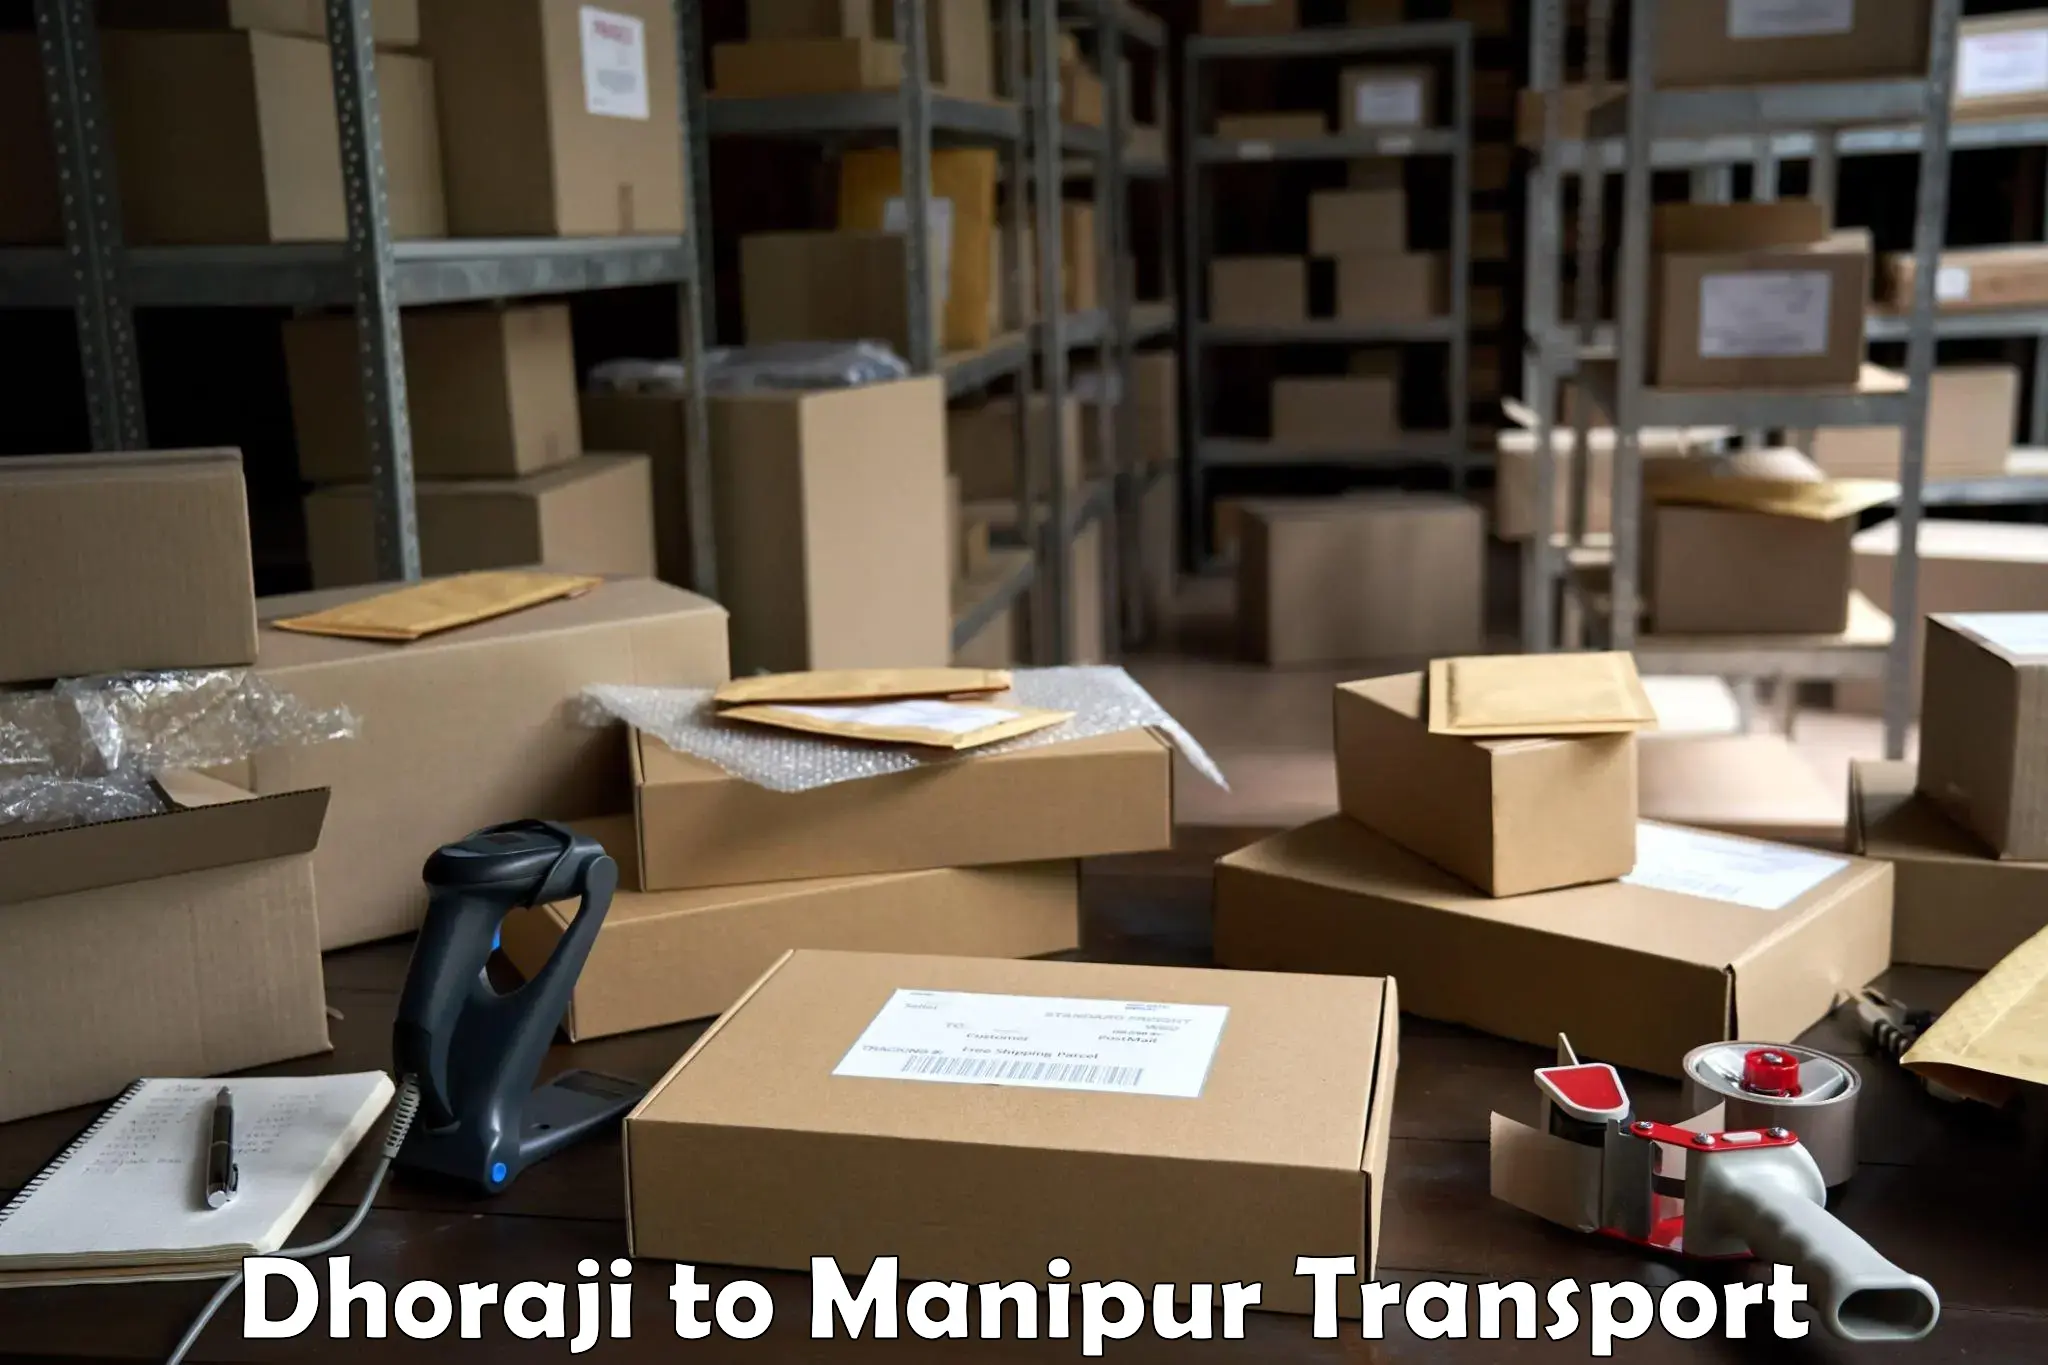 Container transport service Dhoraji to Manipur